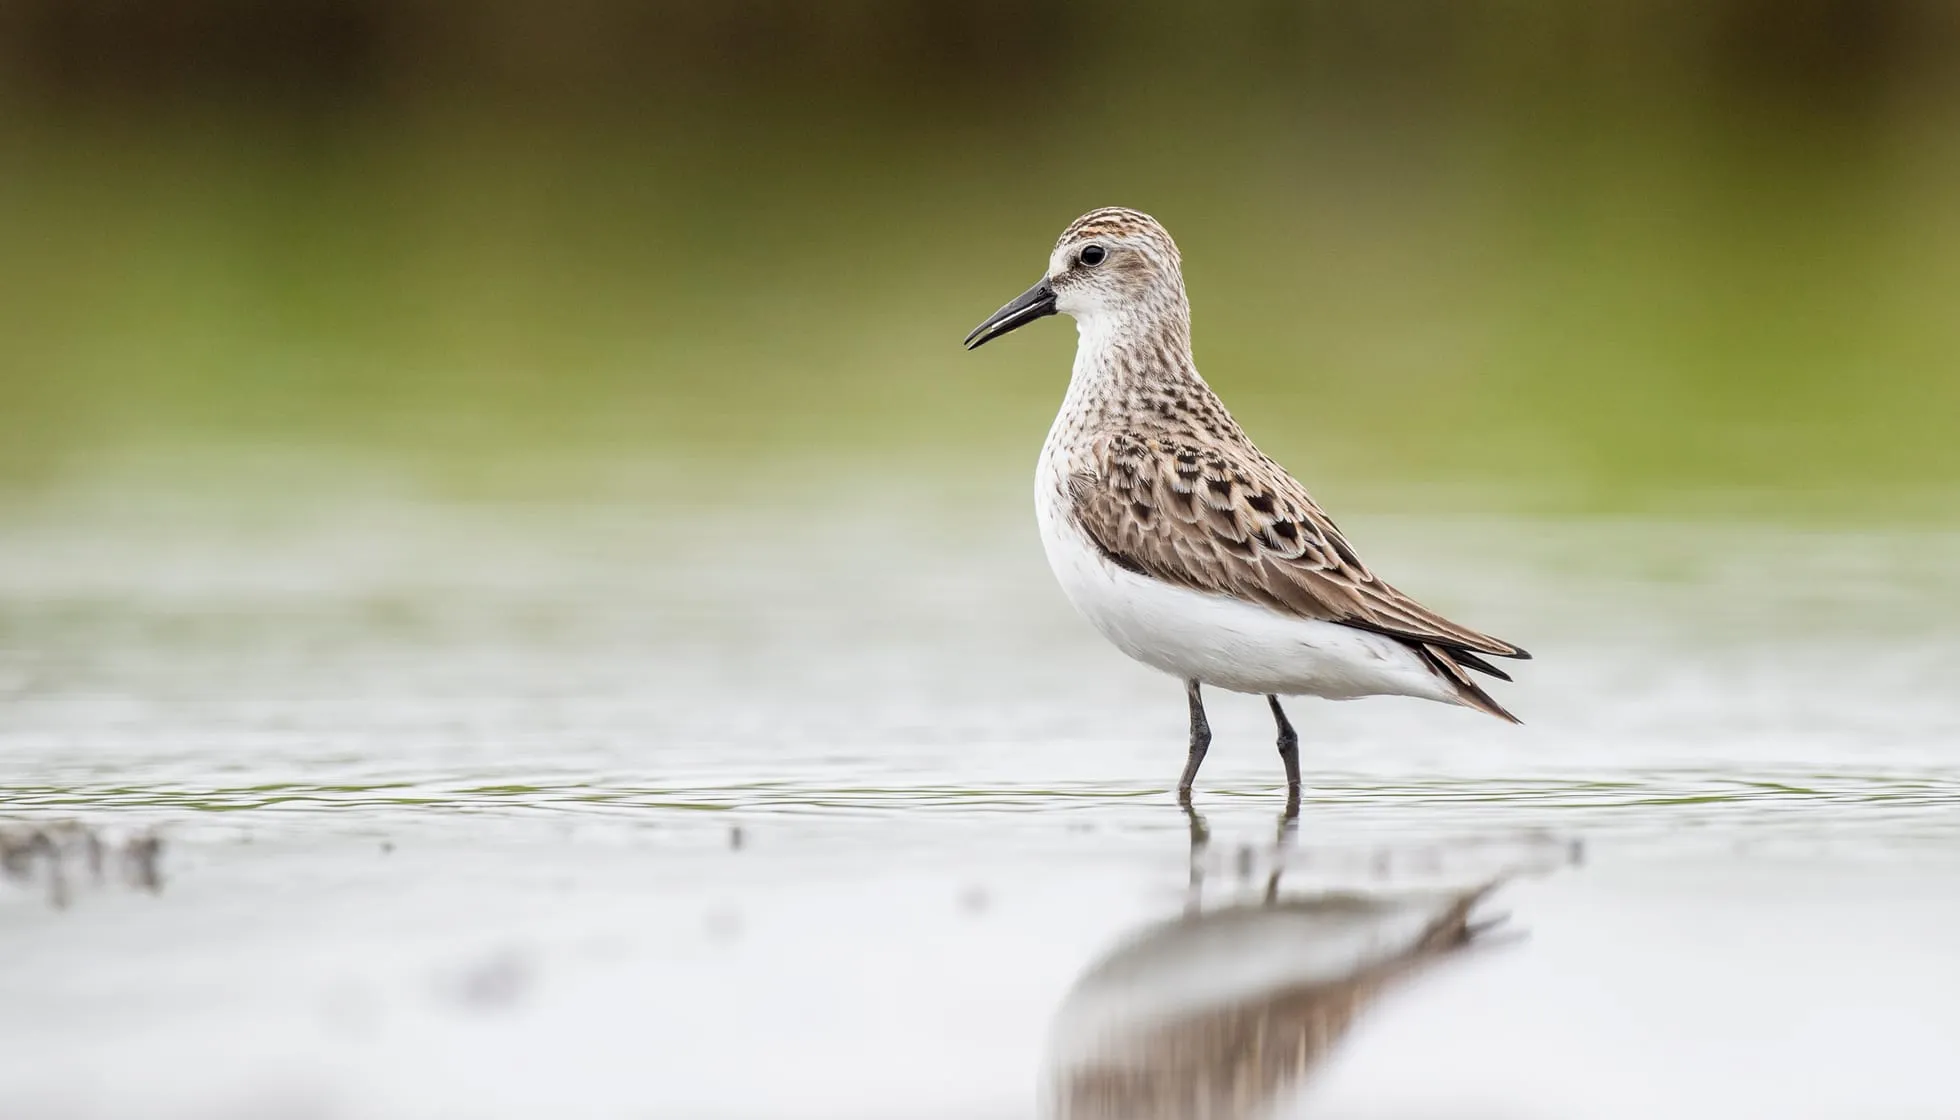 A Semi-palmated Sandpiper wading in the shallow water 